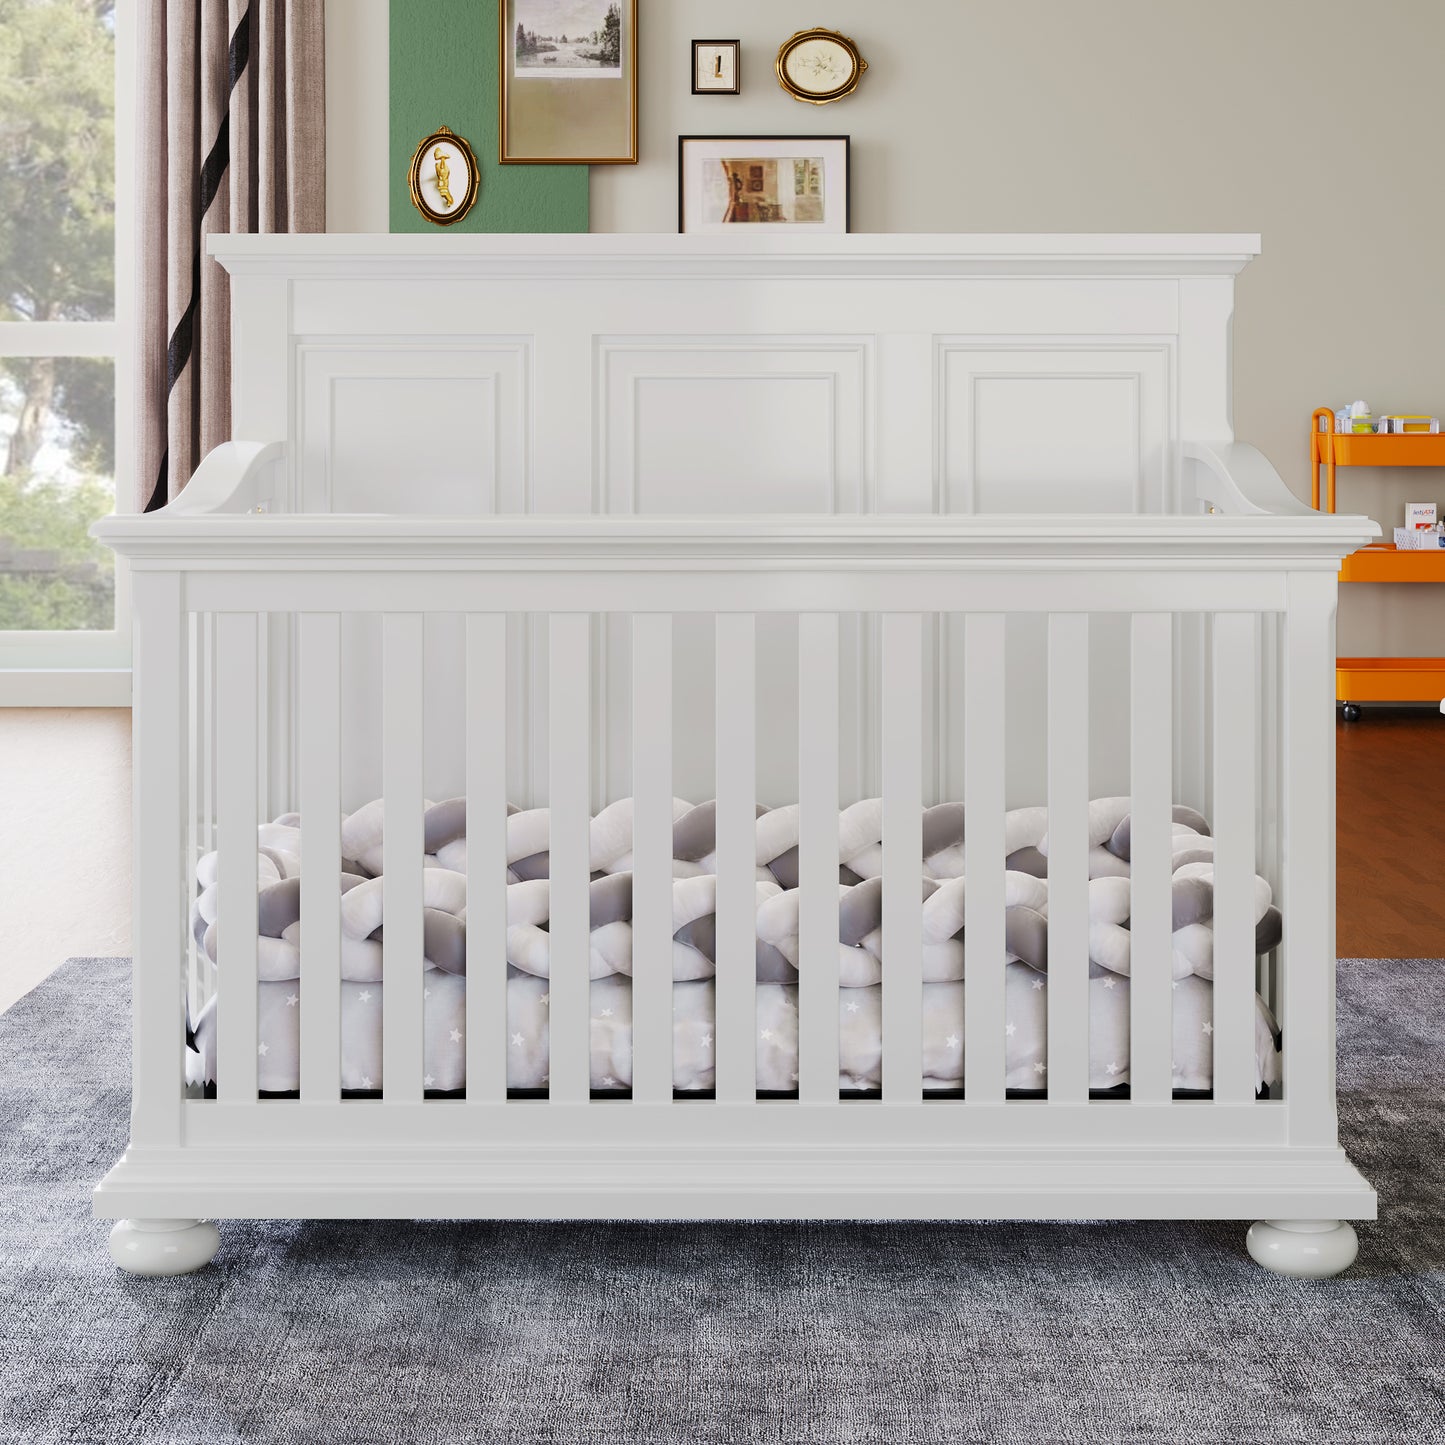 Traditional Farmhouse Style 4-in-1 Full Size Convertible Baby Crib - Converts to Toddler Bed, Daybed and Full-Size Bed, White